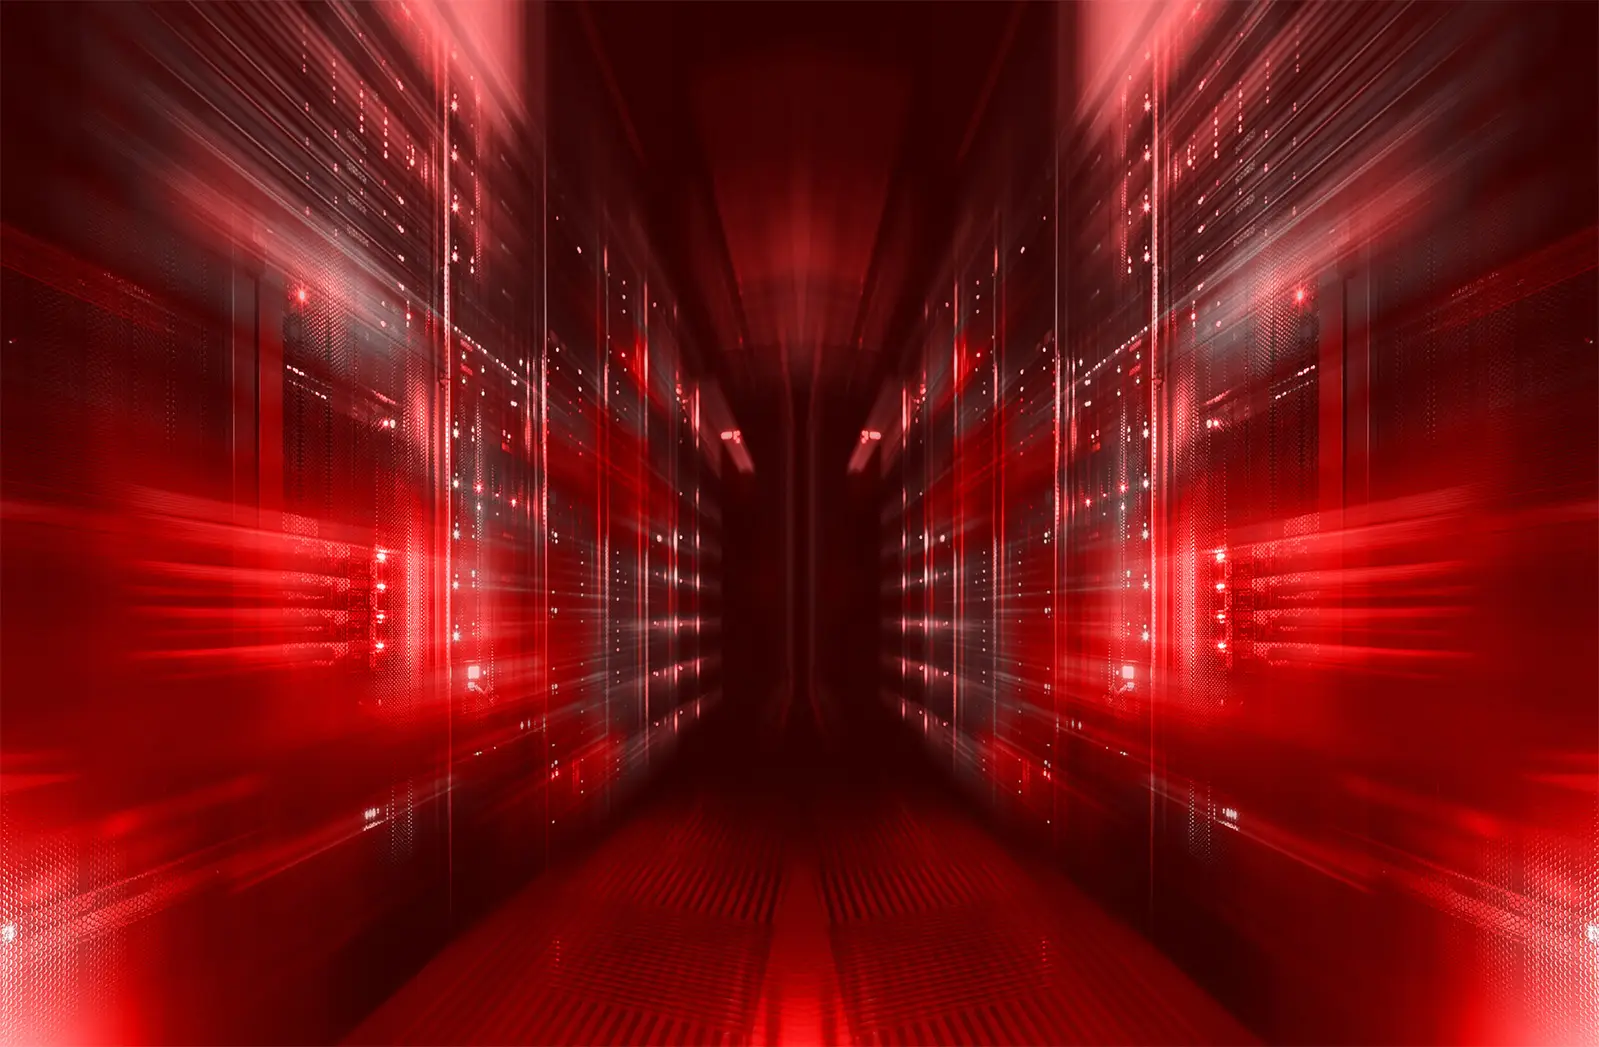 Surreal photo of red-streaked data center aisle